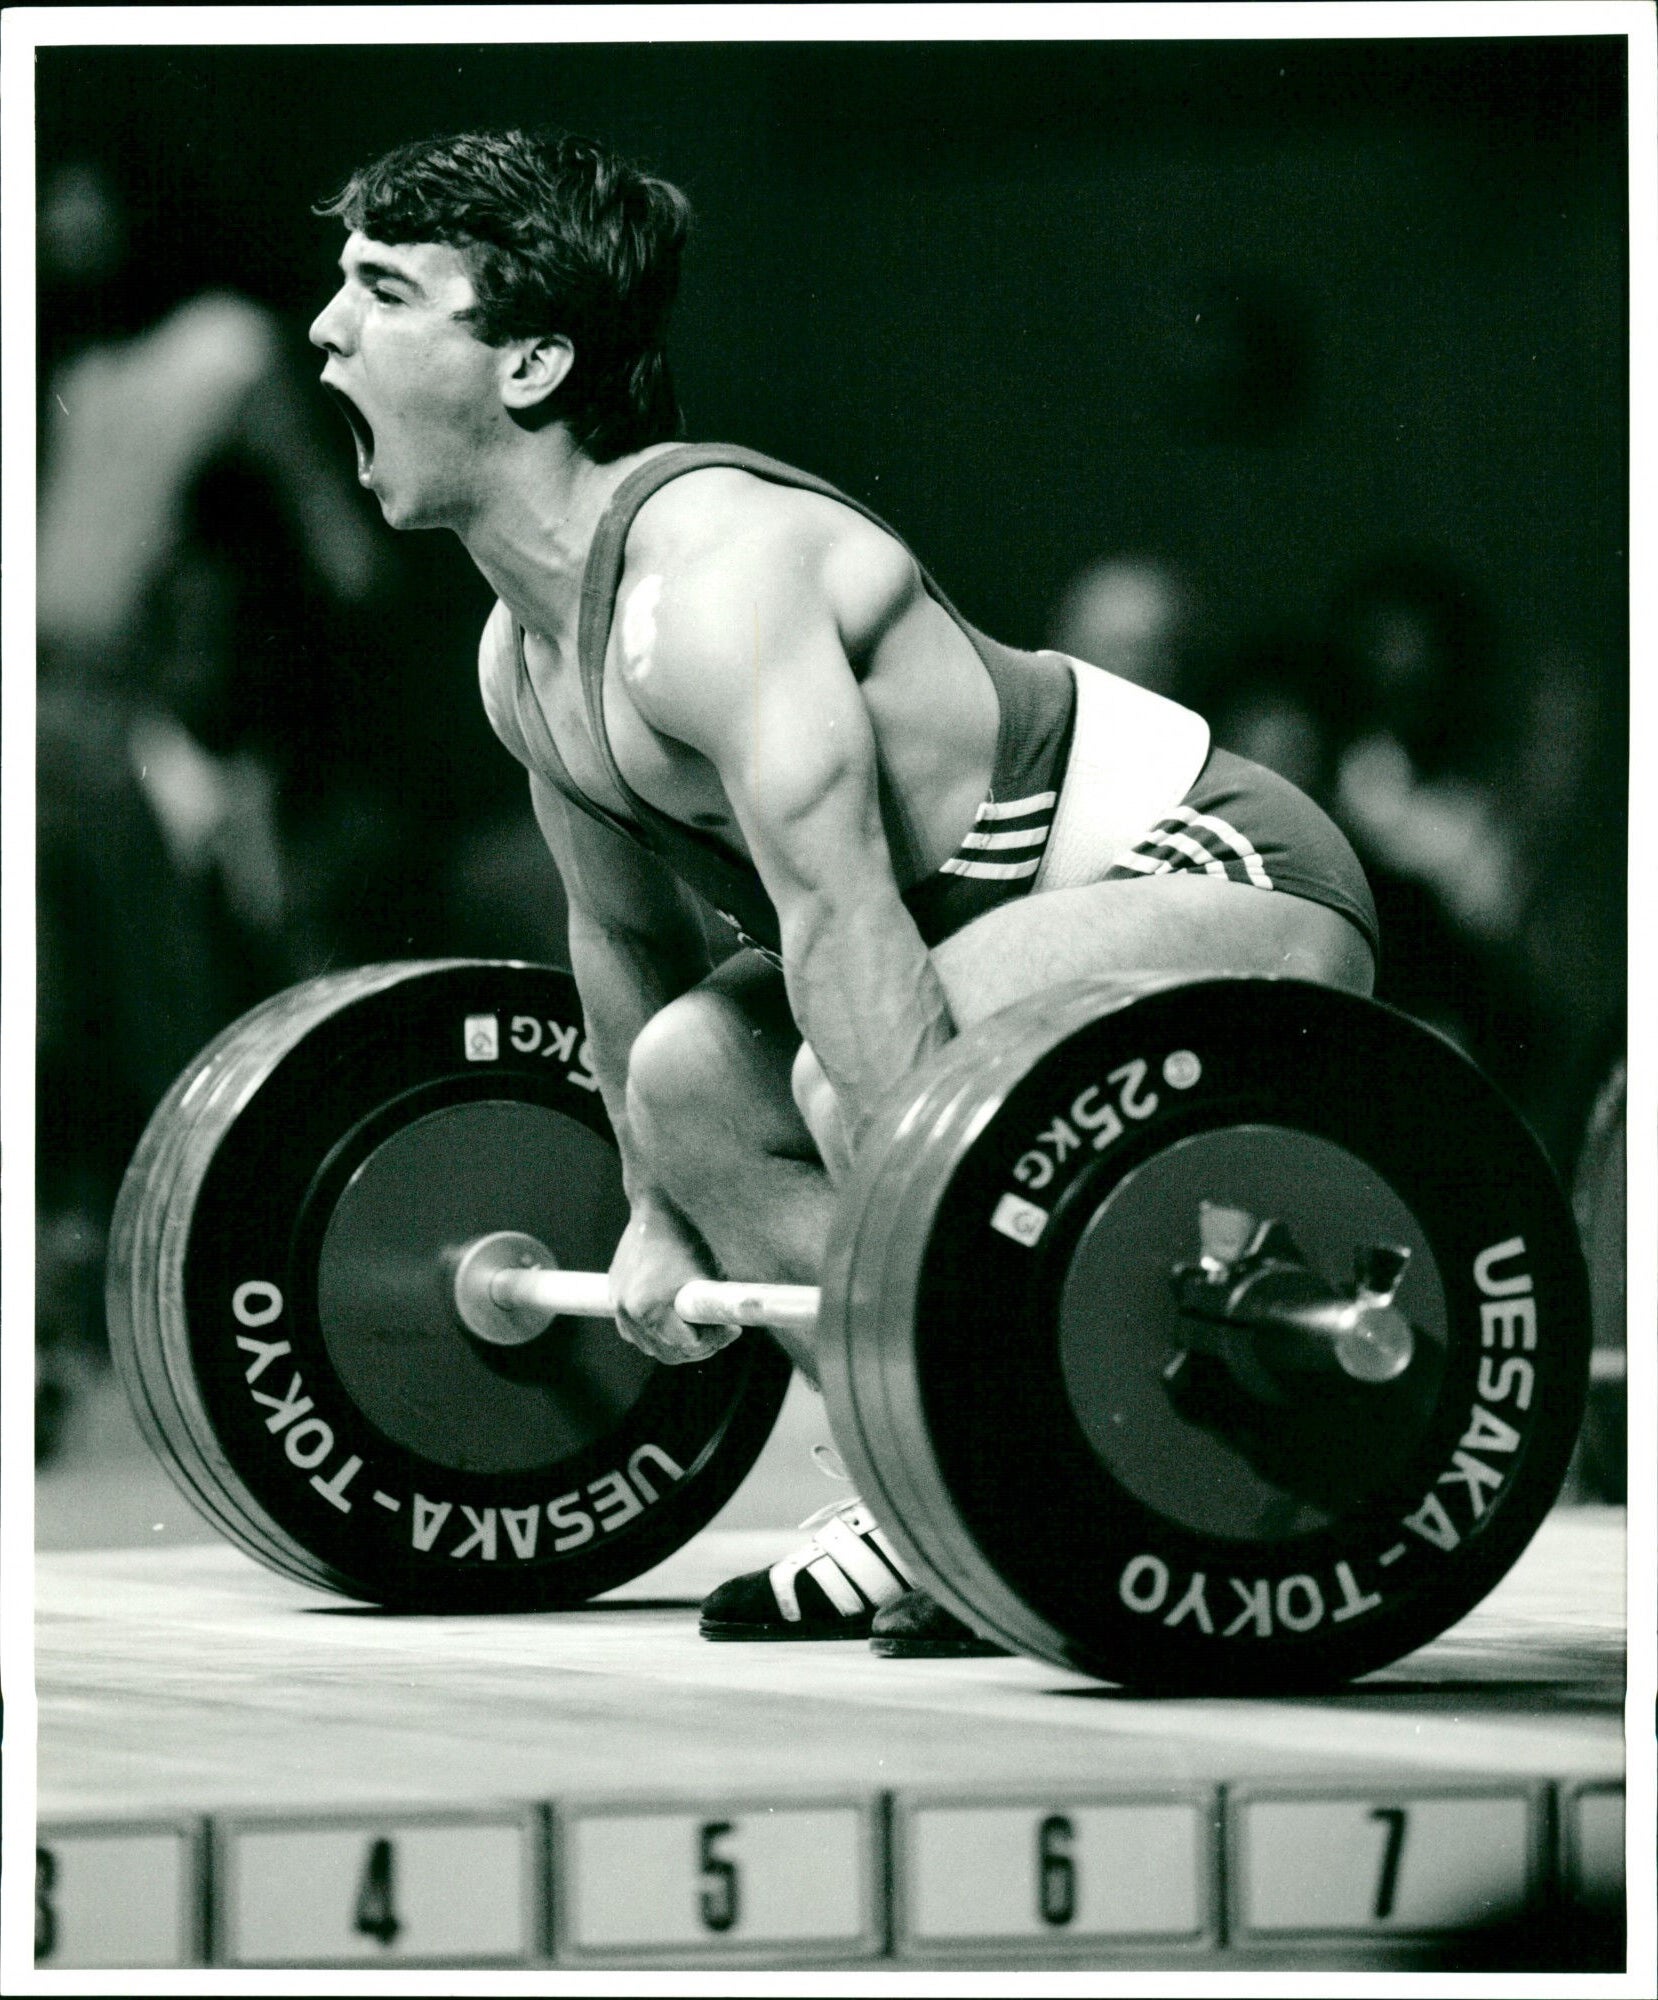 Weightlifter representing Turkey lets out roar during competition, Seoul 1988